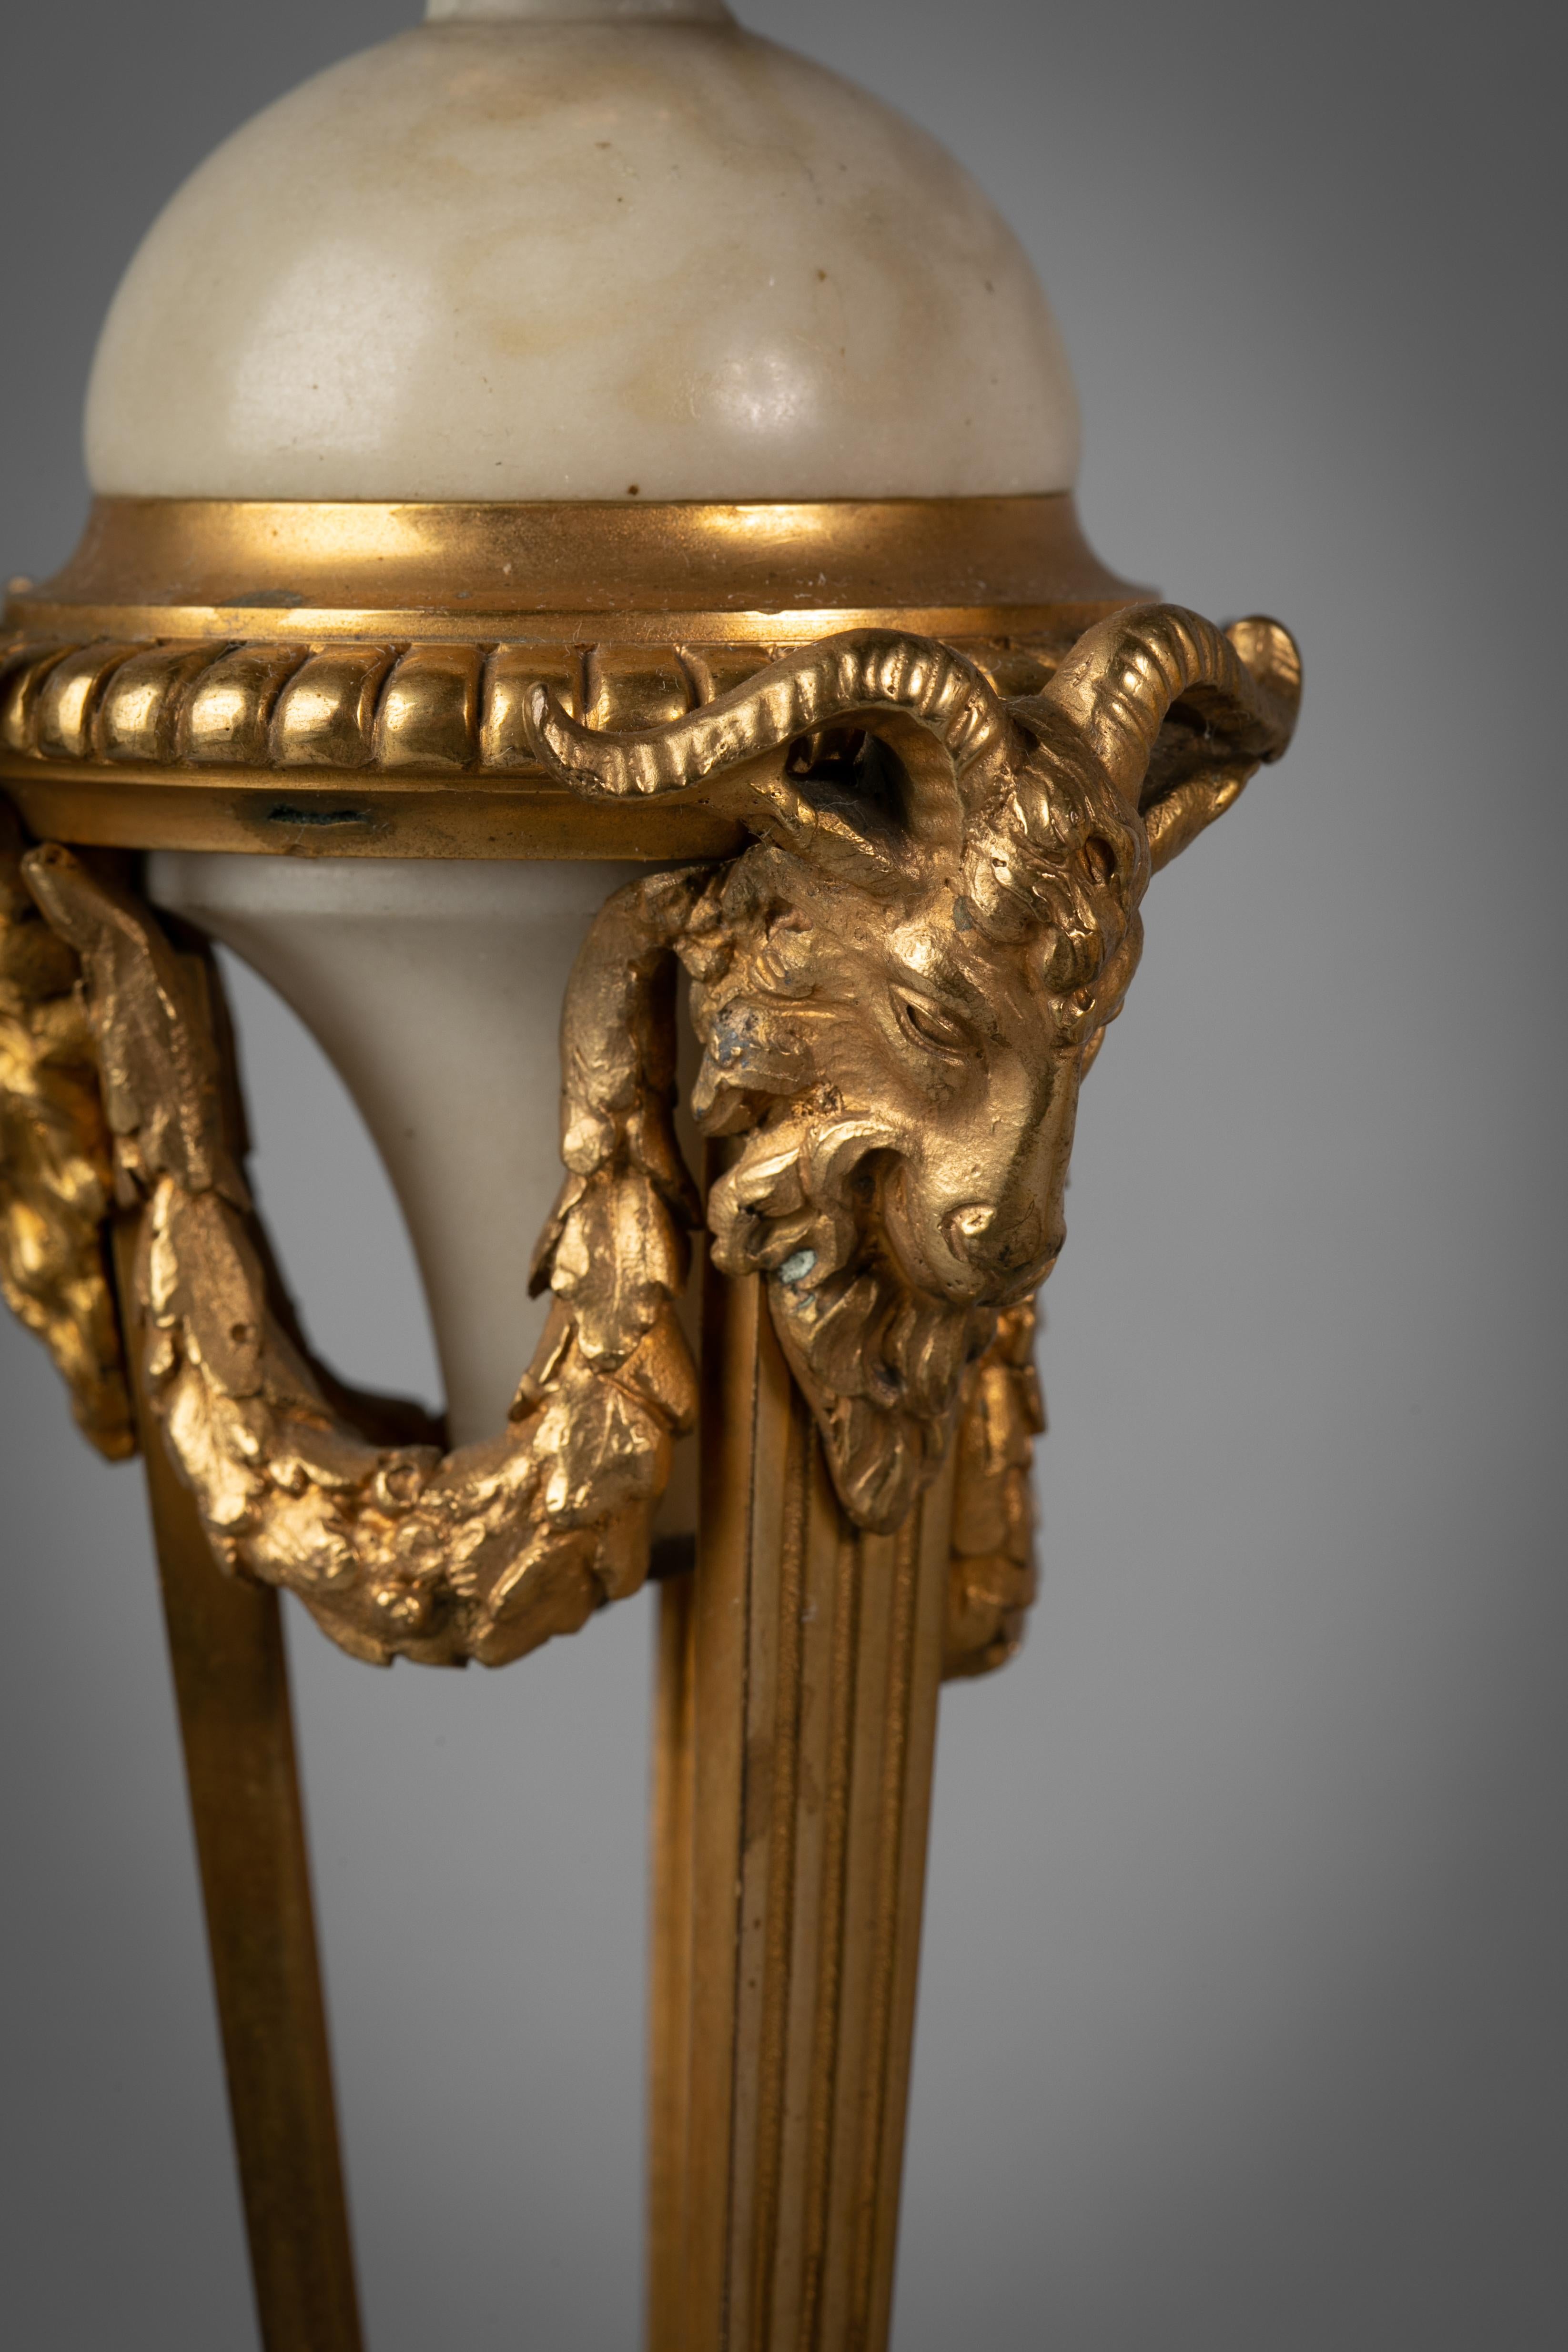 Pair of French gilt bronze and marble covered urns with flame finial, ram's head and hoofed feet.